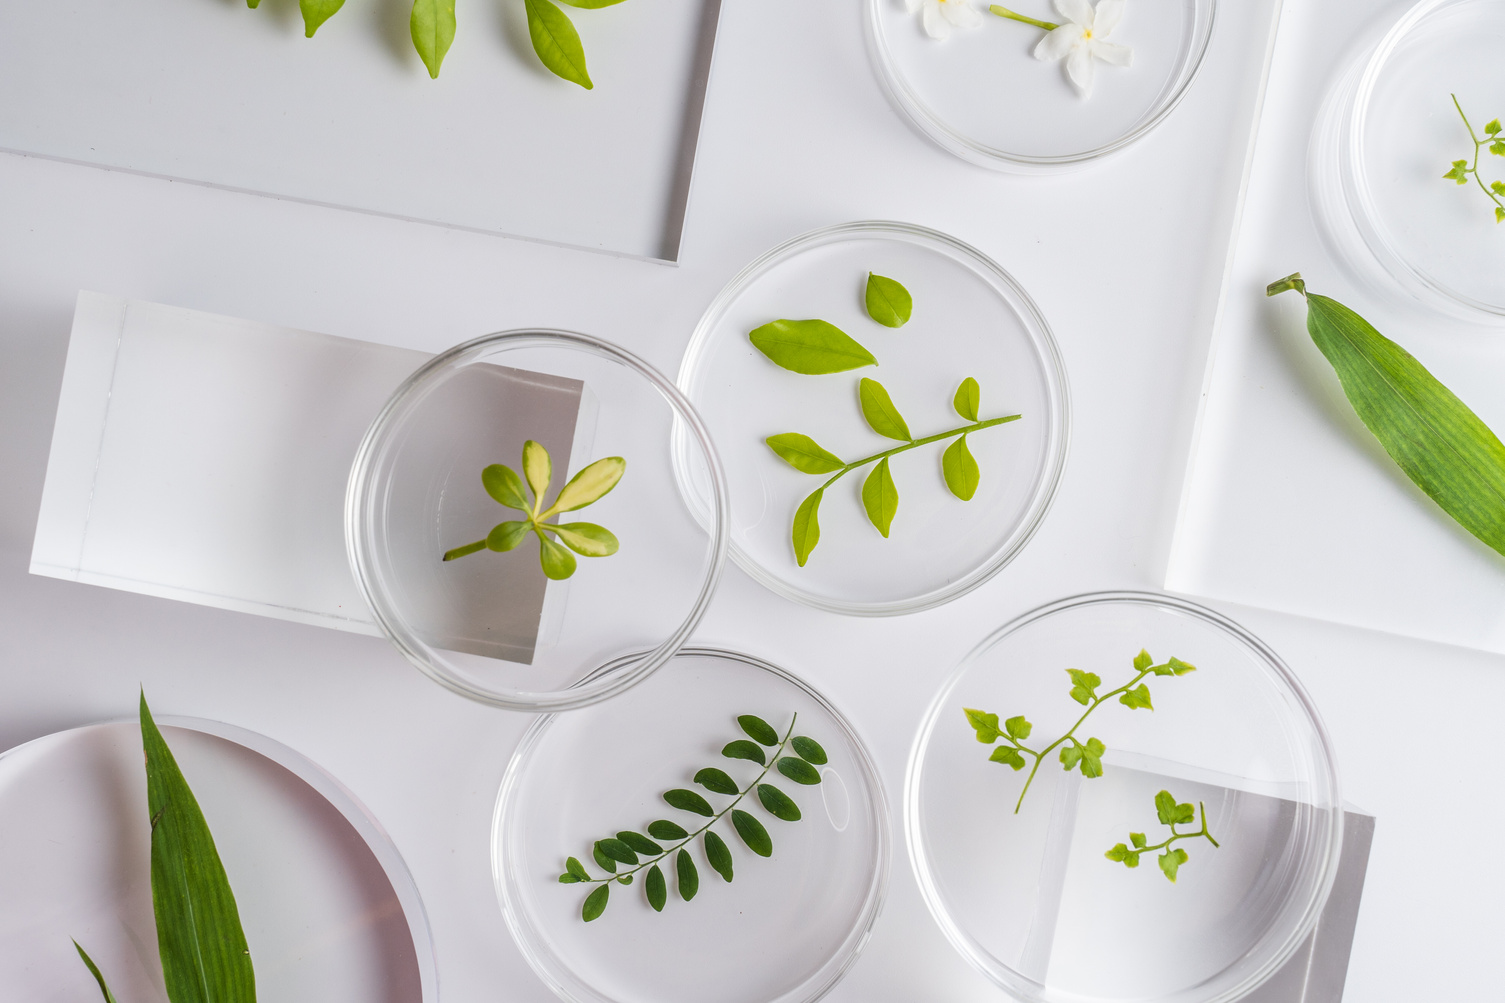 Assorted Leaves in Petri Dishes